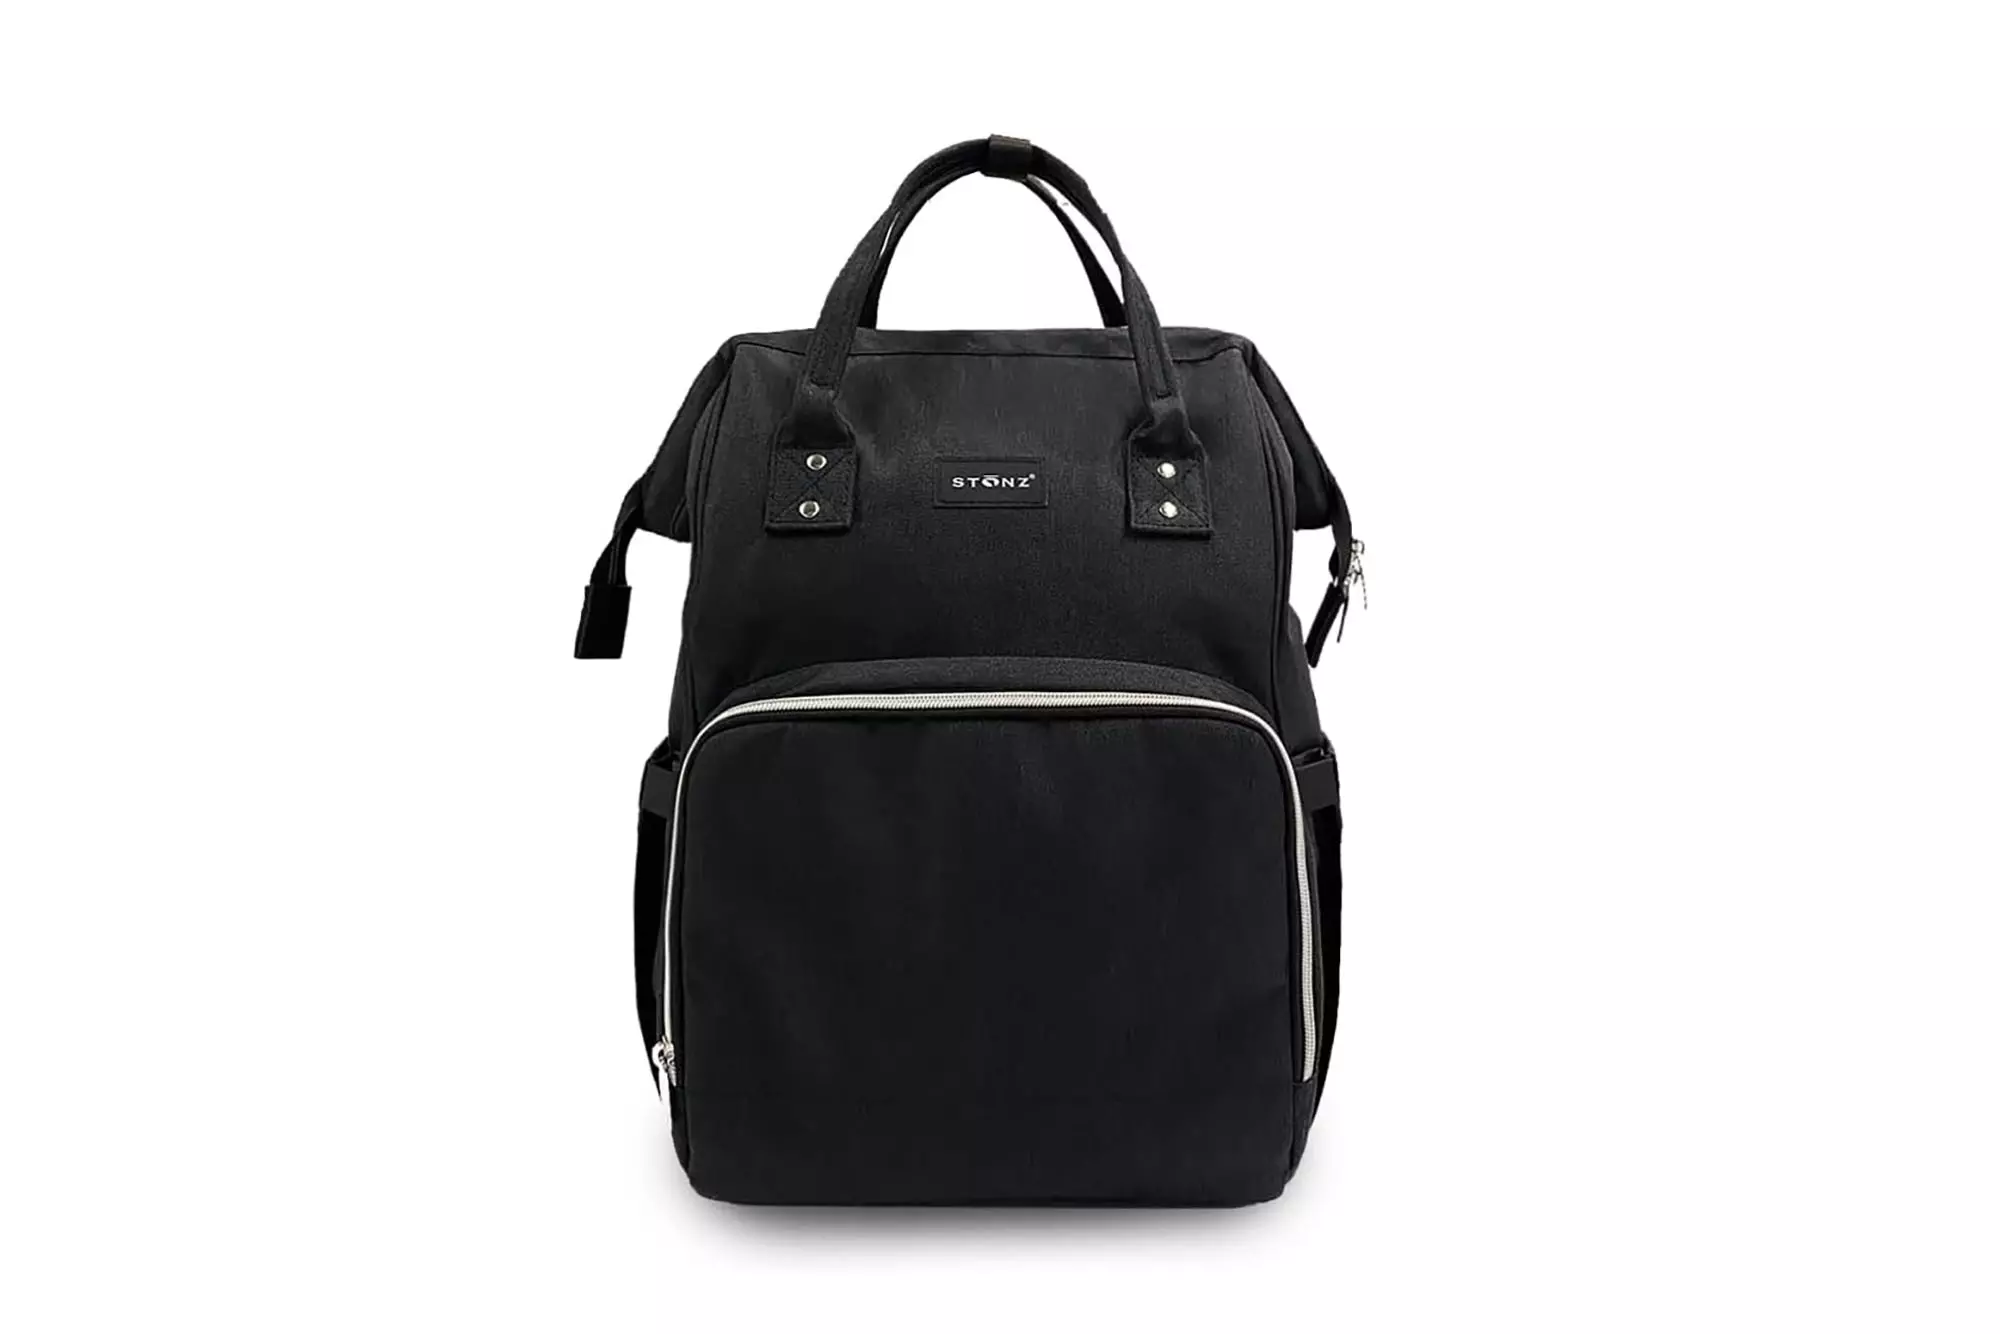 Black backpack with zippers.